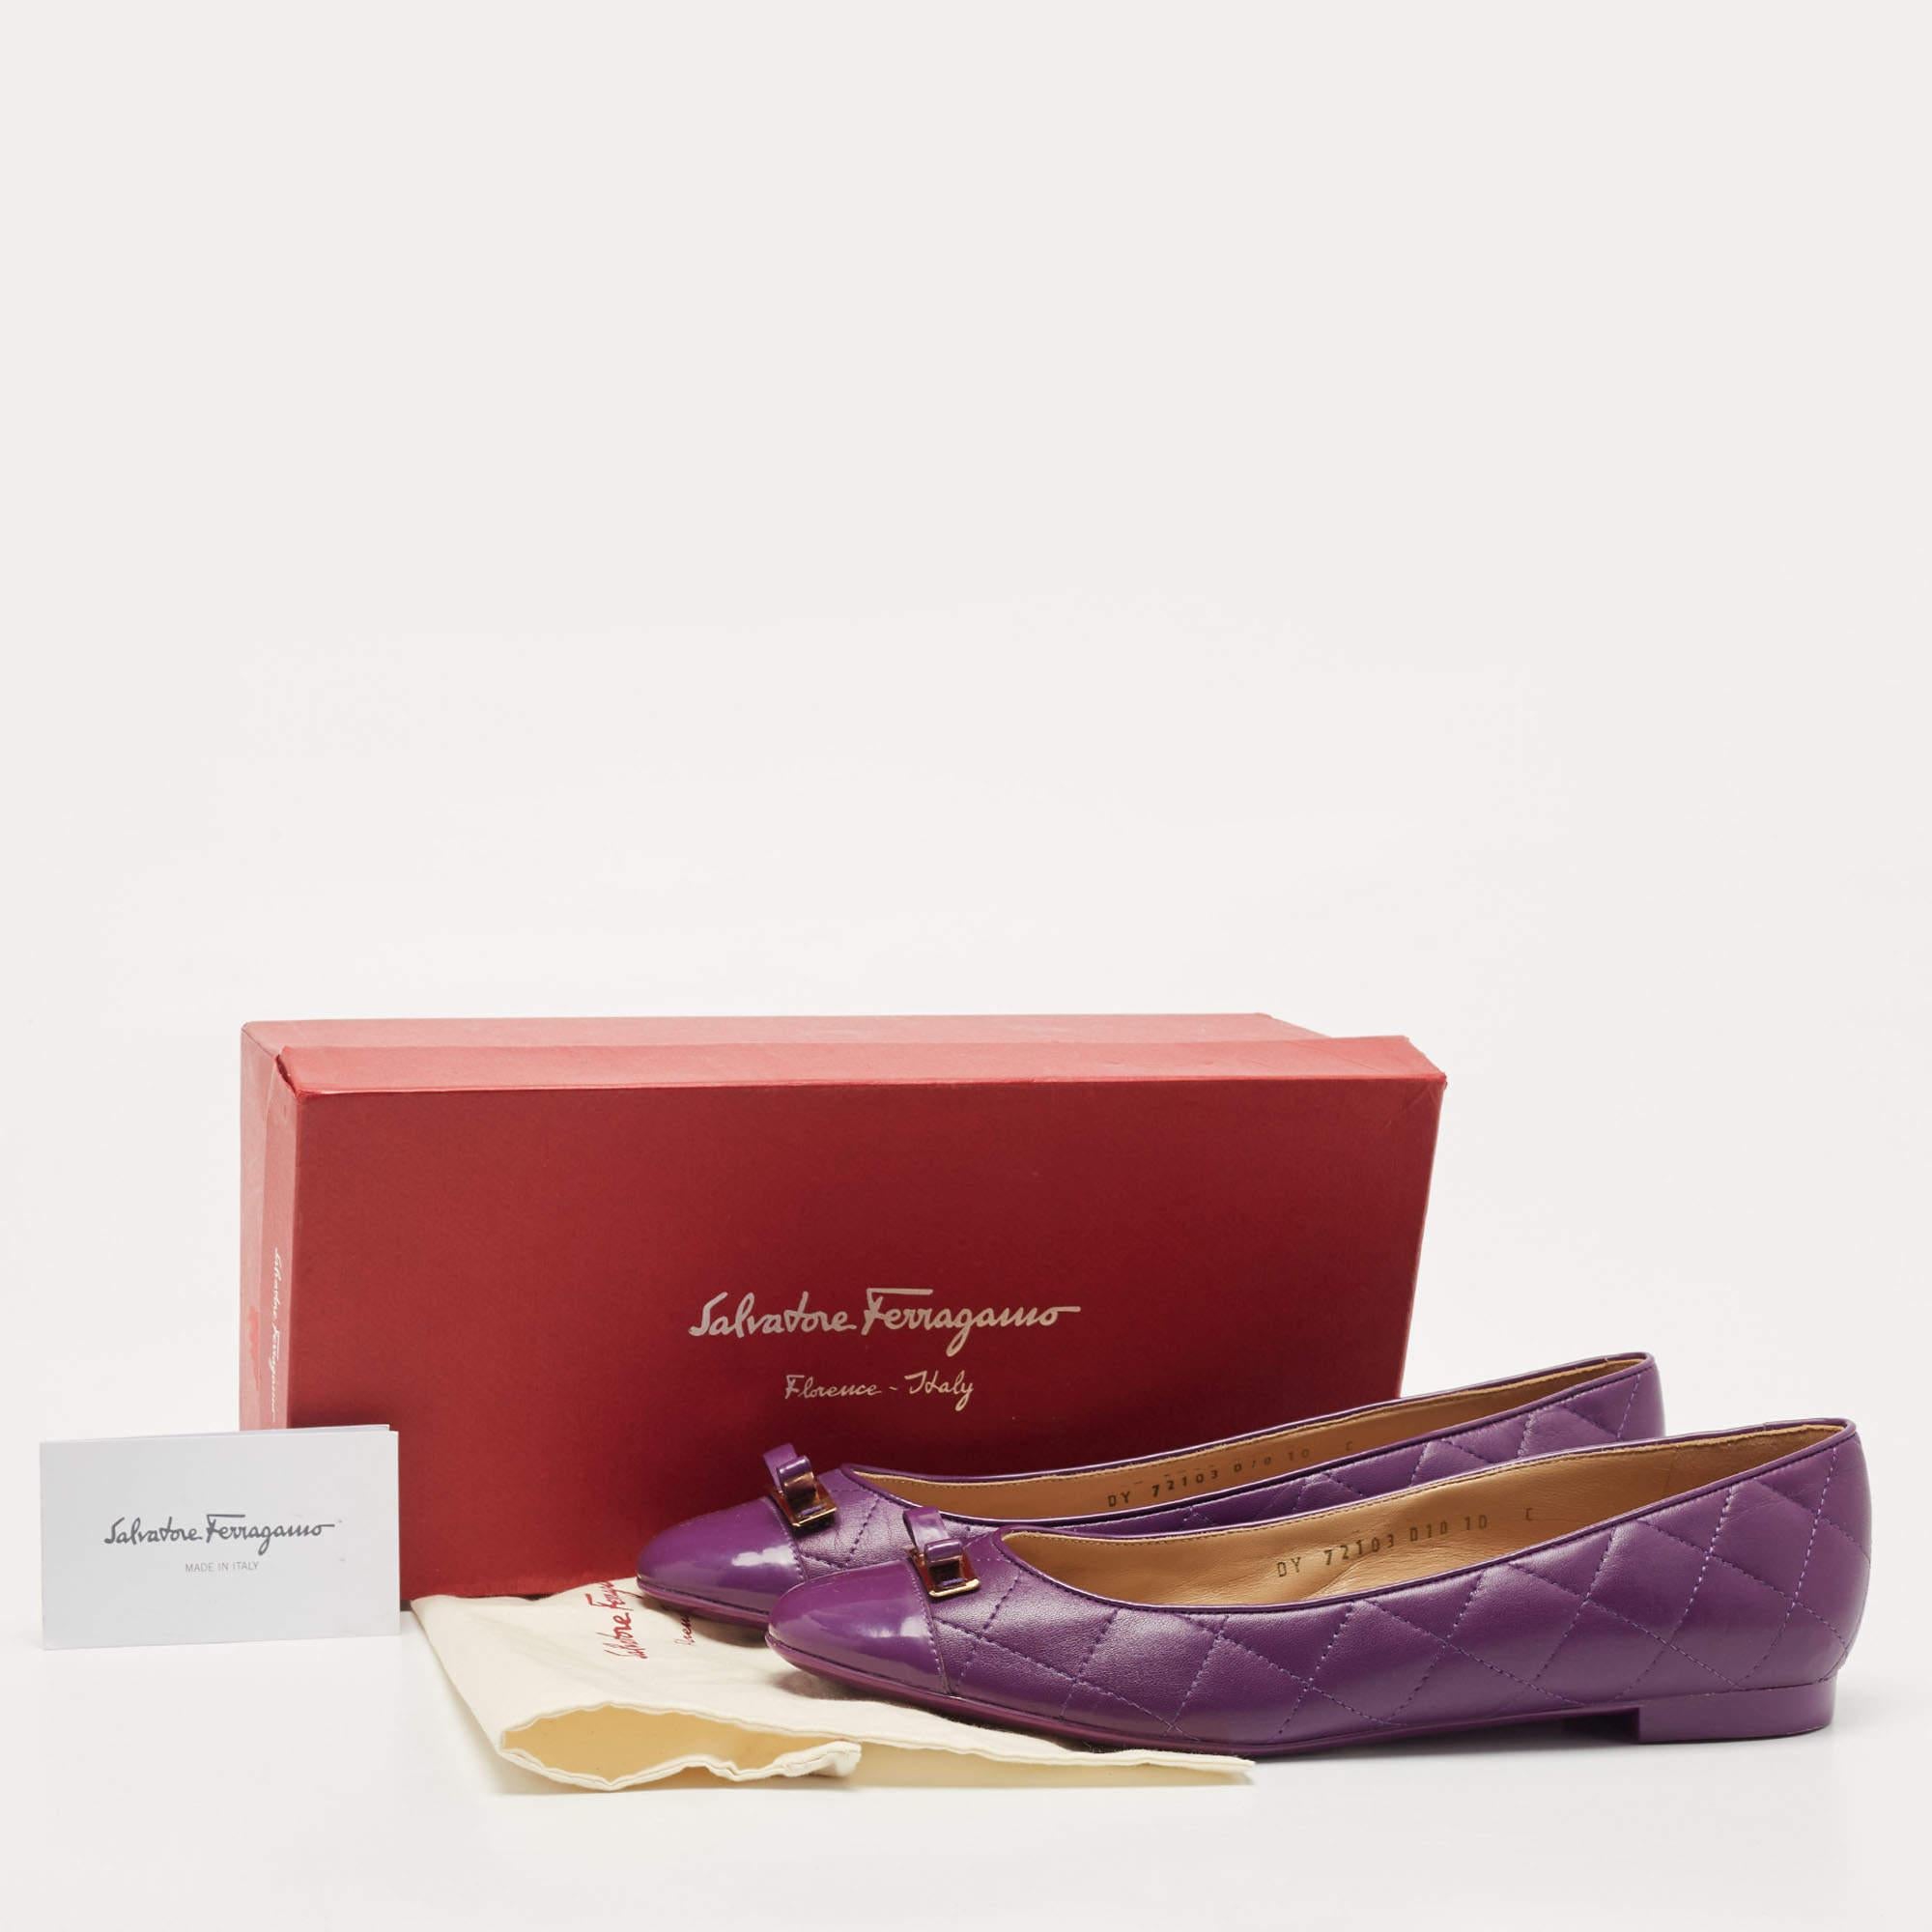 Salvatore Ferragamo Purple Quilted Leather Bow Ballet Flats Size 40.5 5